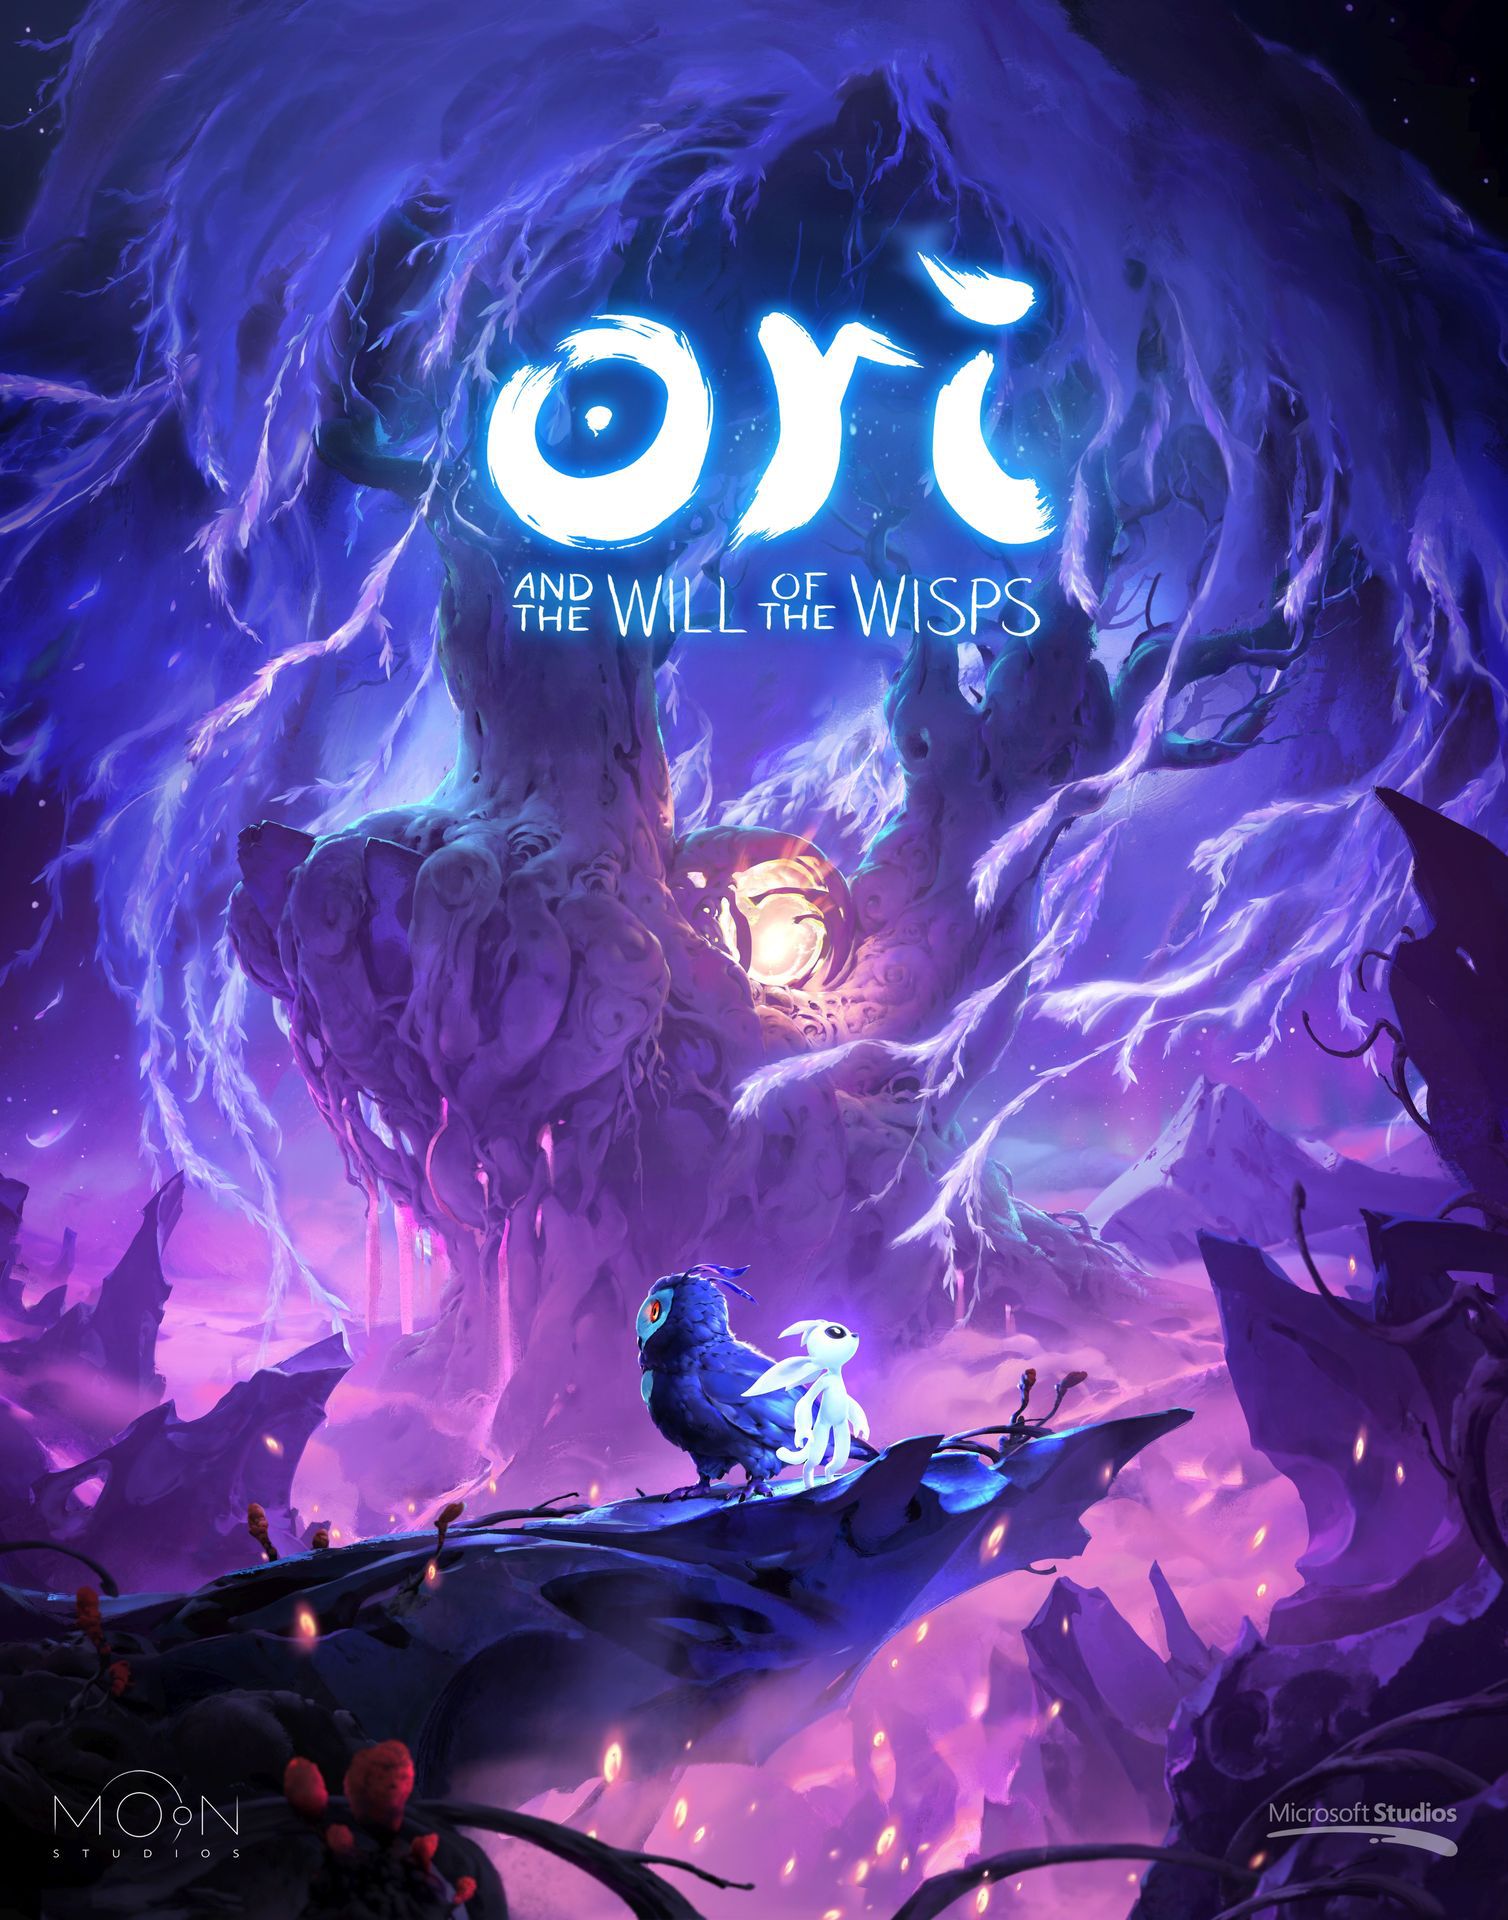 jaquette du jeu vidéo Ori and the Will of the Wisps